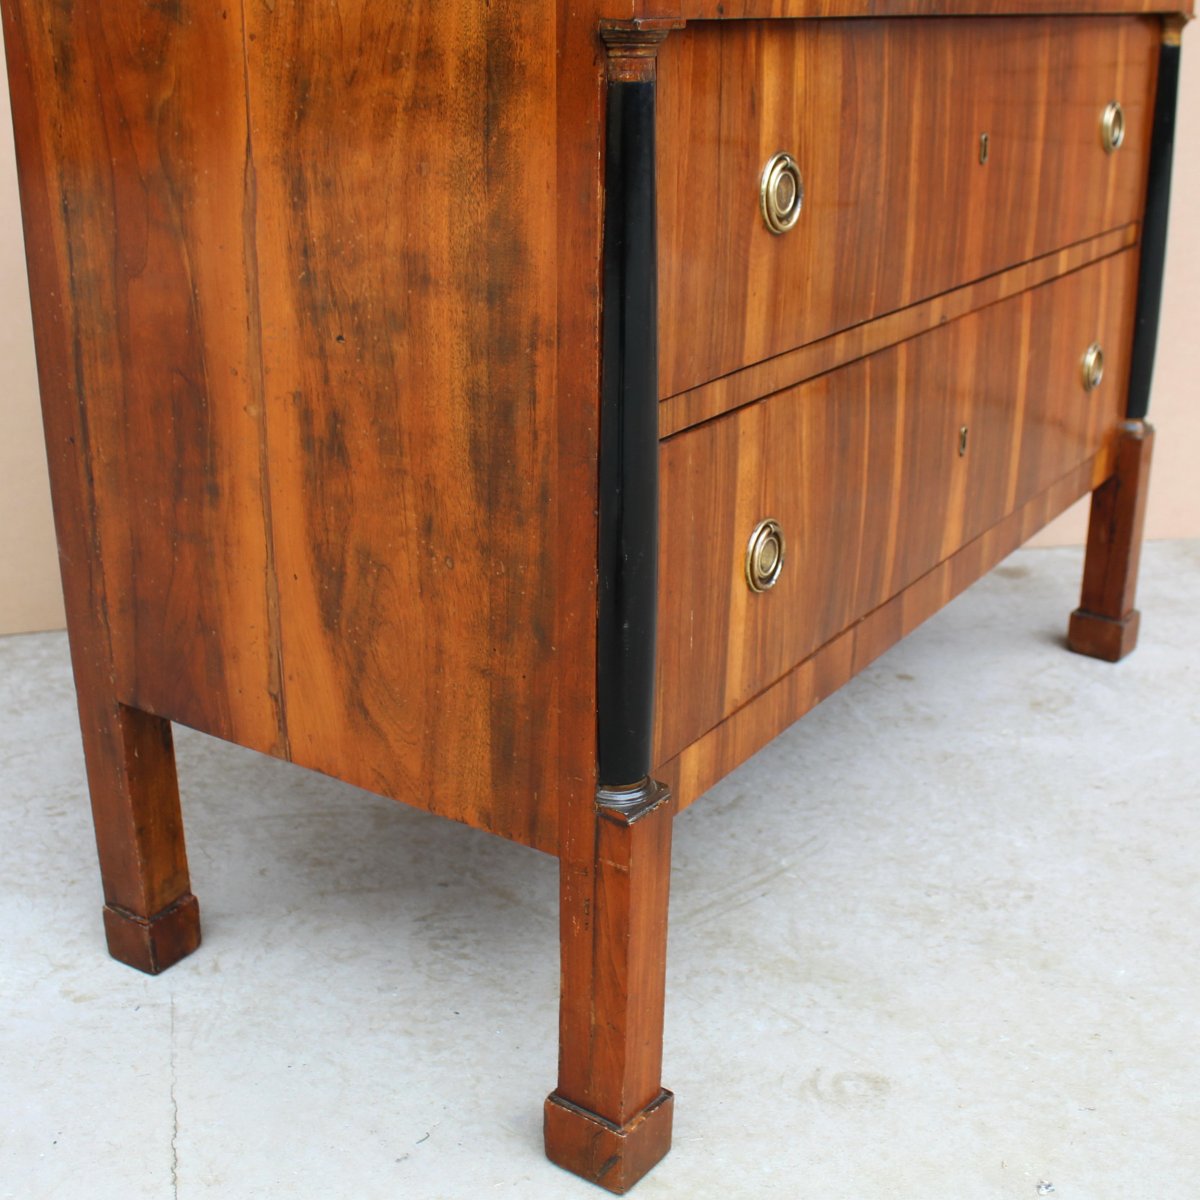 Antique Empire Dresser Commode Chest Of Drawers In Walnut - Italy 19th Century-photo-6